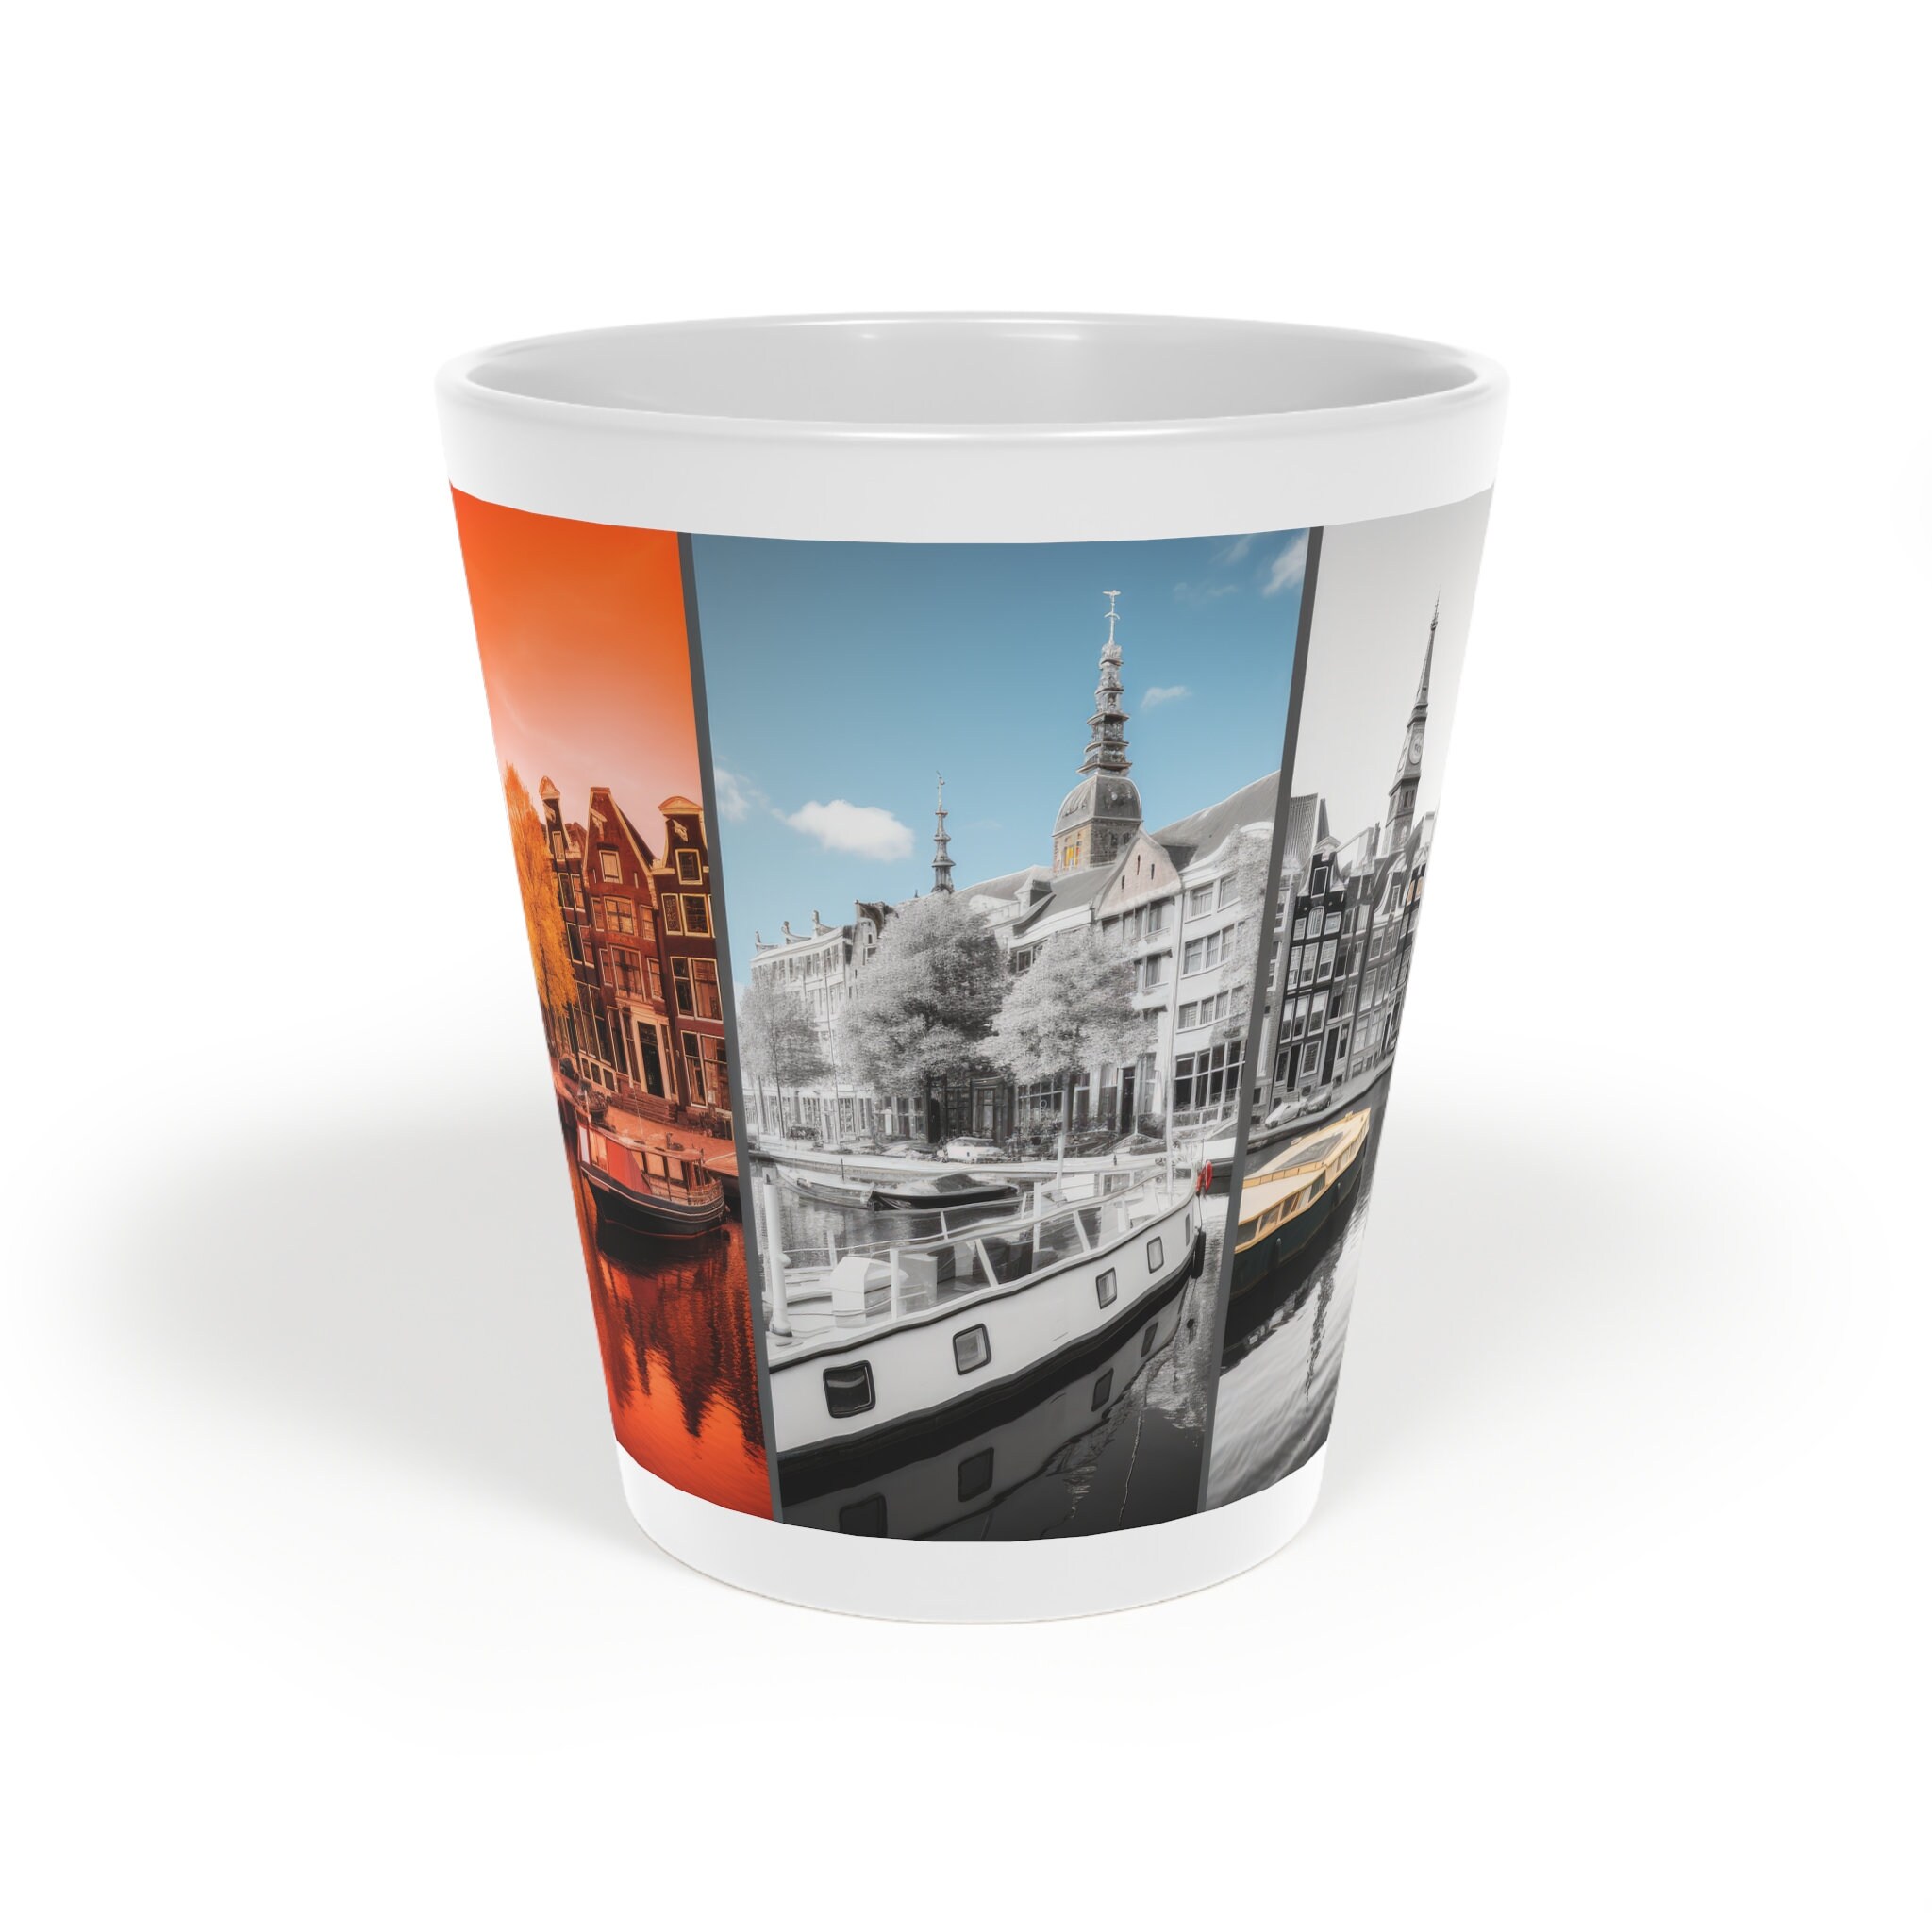 12 Awesome Coffee Mugs That Will Make You Say 'I Want One!', Amsterdam  Printing Blog